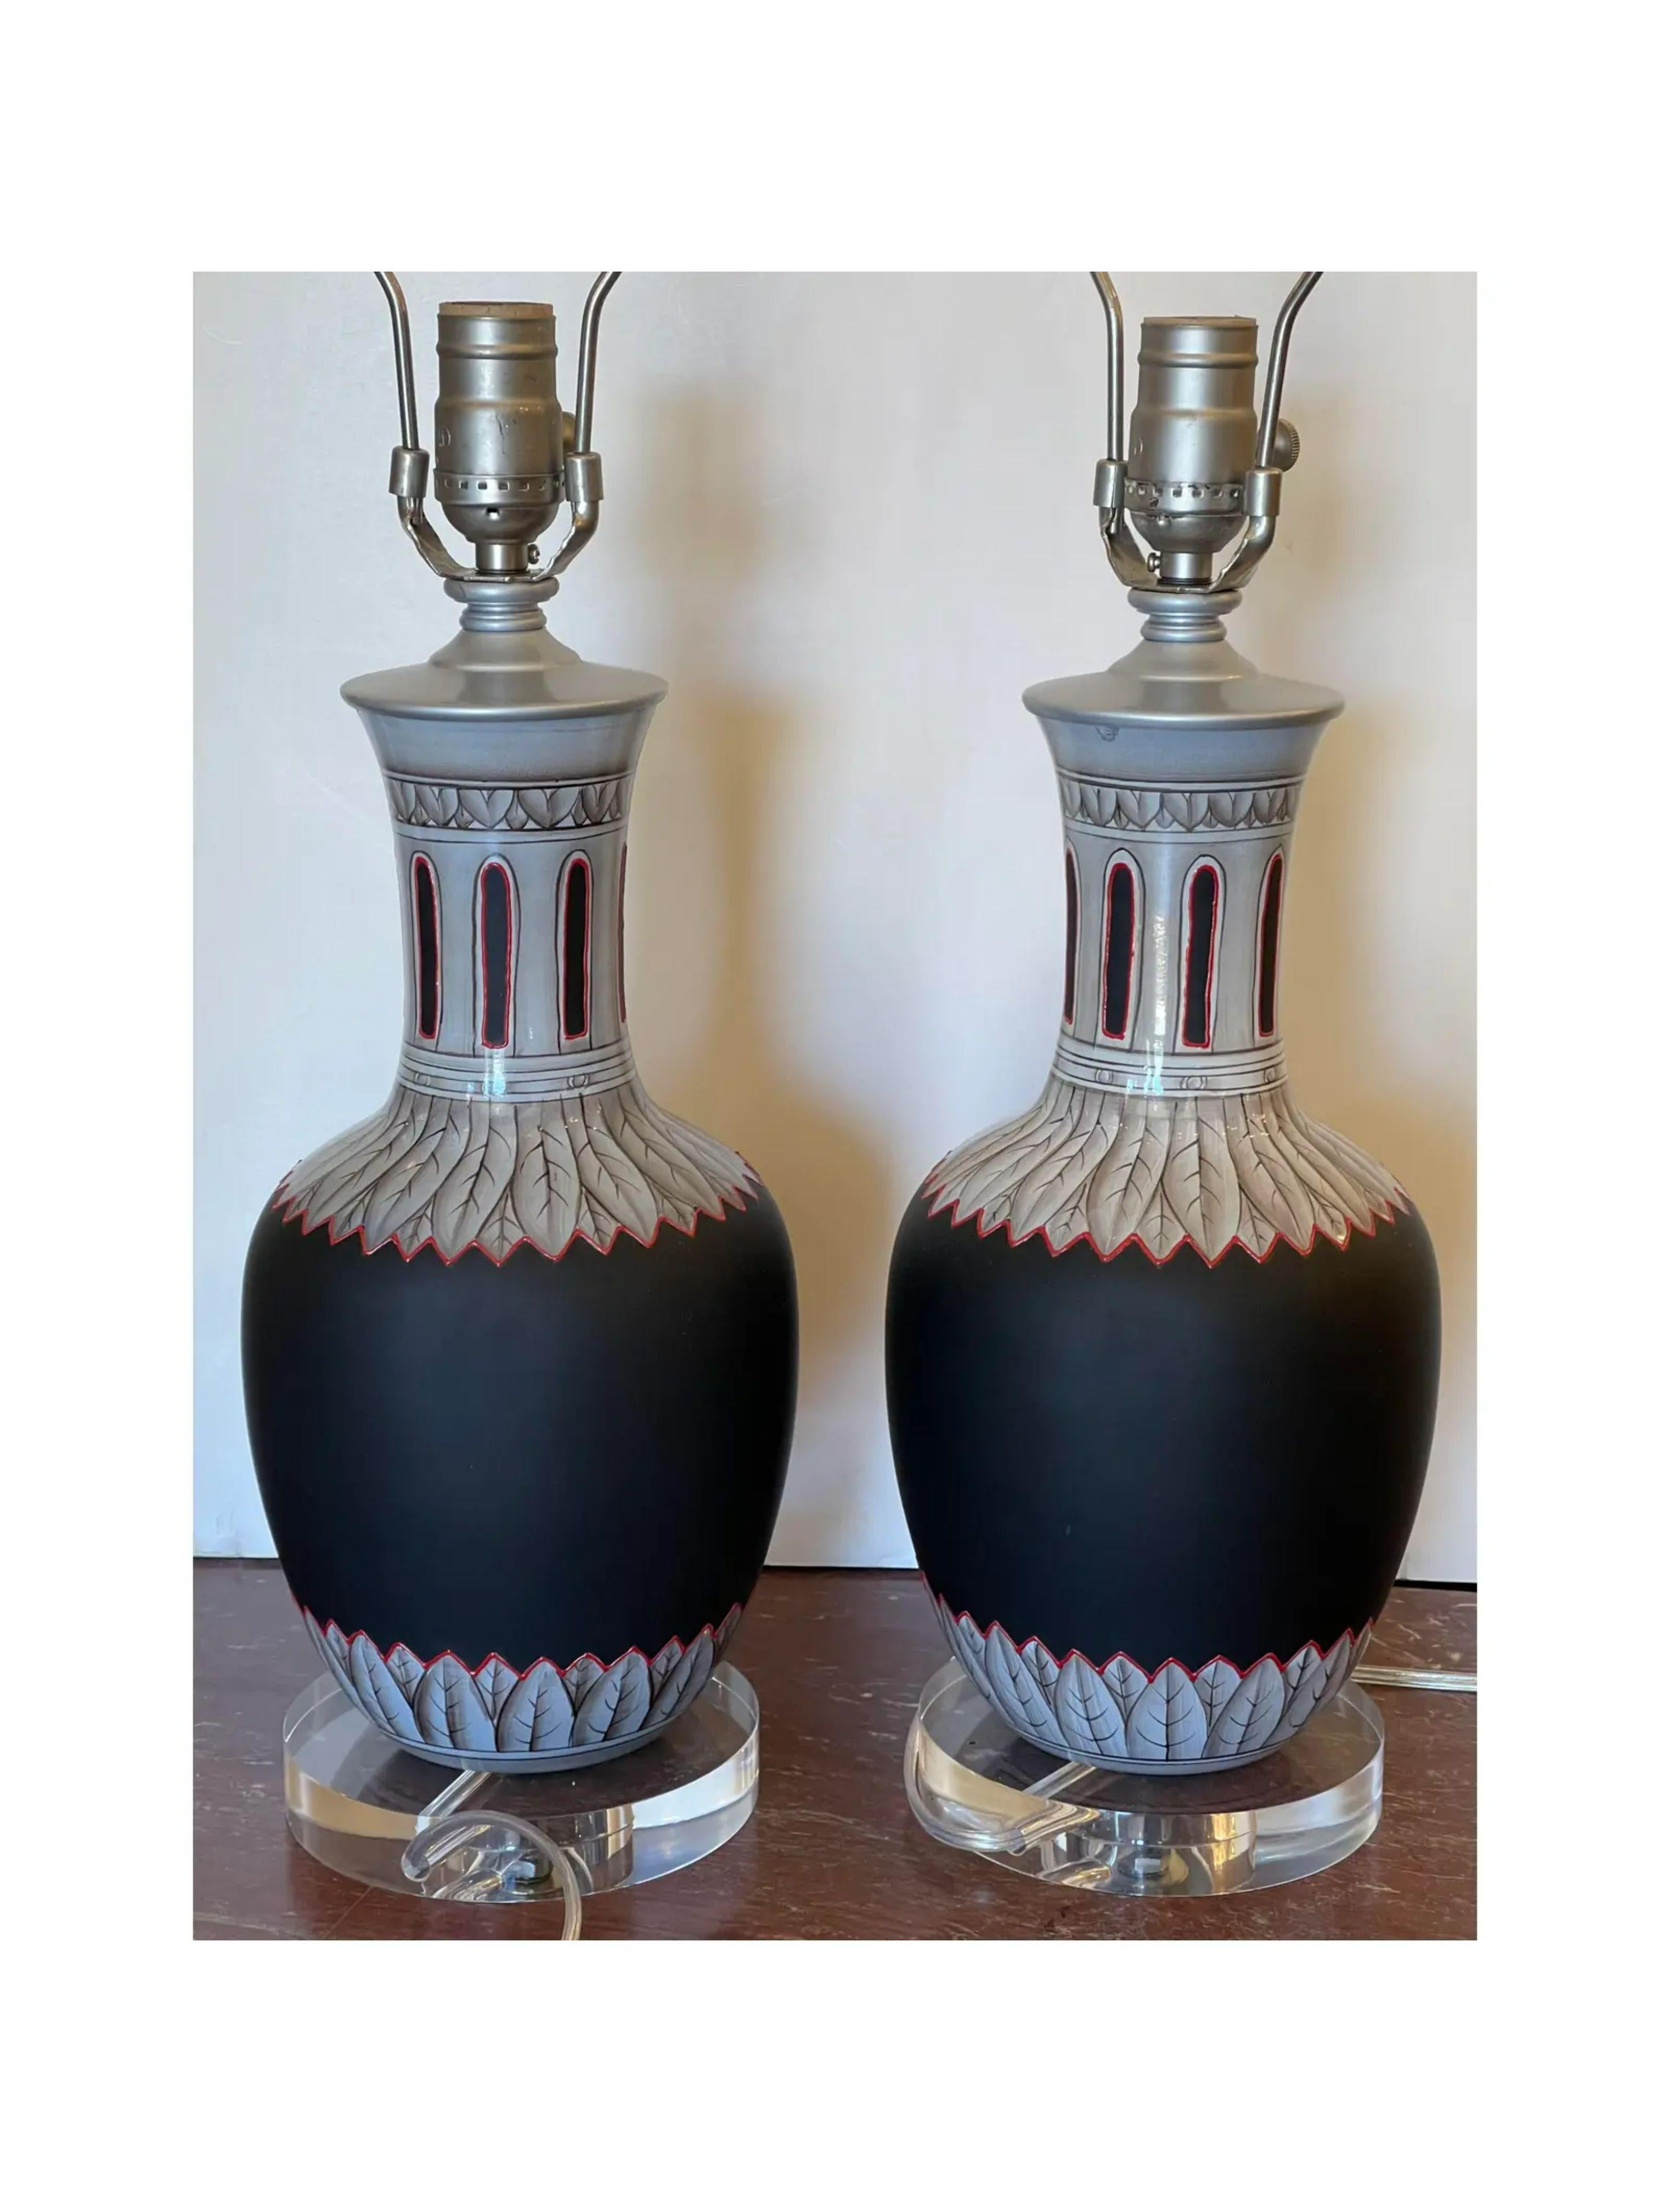 Antique Greco Roman enamel glass vases now designer table lamps - a Pair

Additional information: 
Materials: Enamel, Glass, Lights, Lucite
Color: Black
Period: 19th Century
Styles: Italian
Lamp Shade: Not Included
Power Sources: Up to 120V